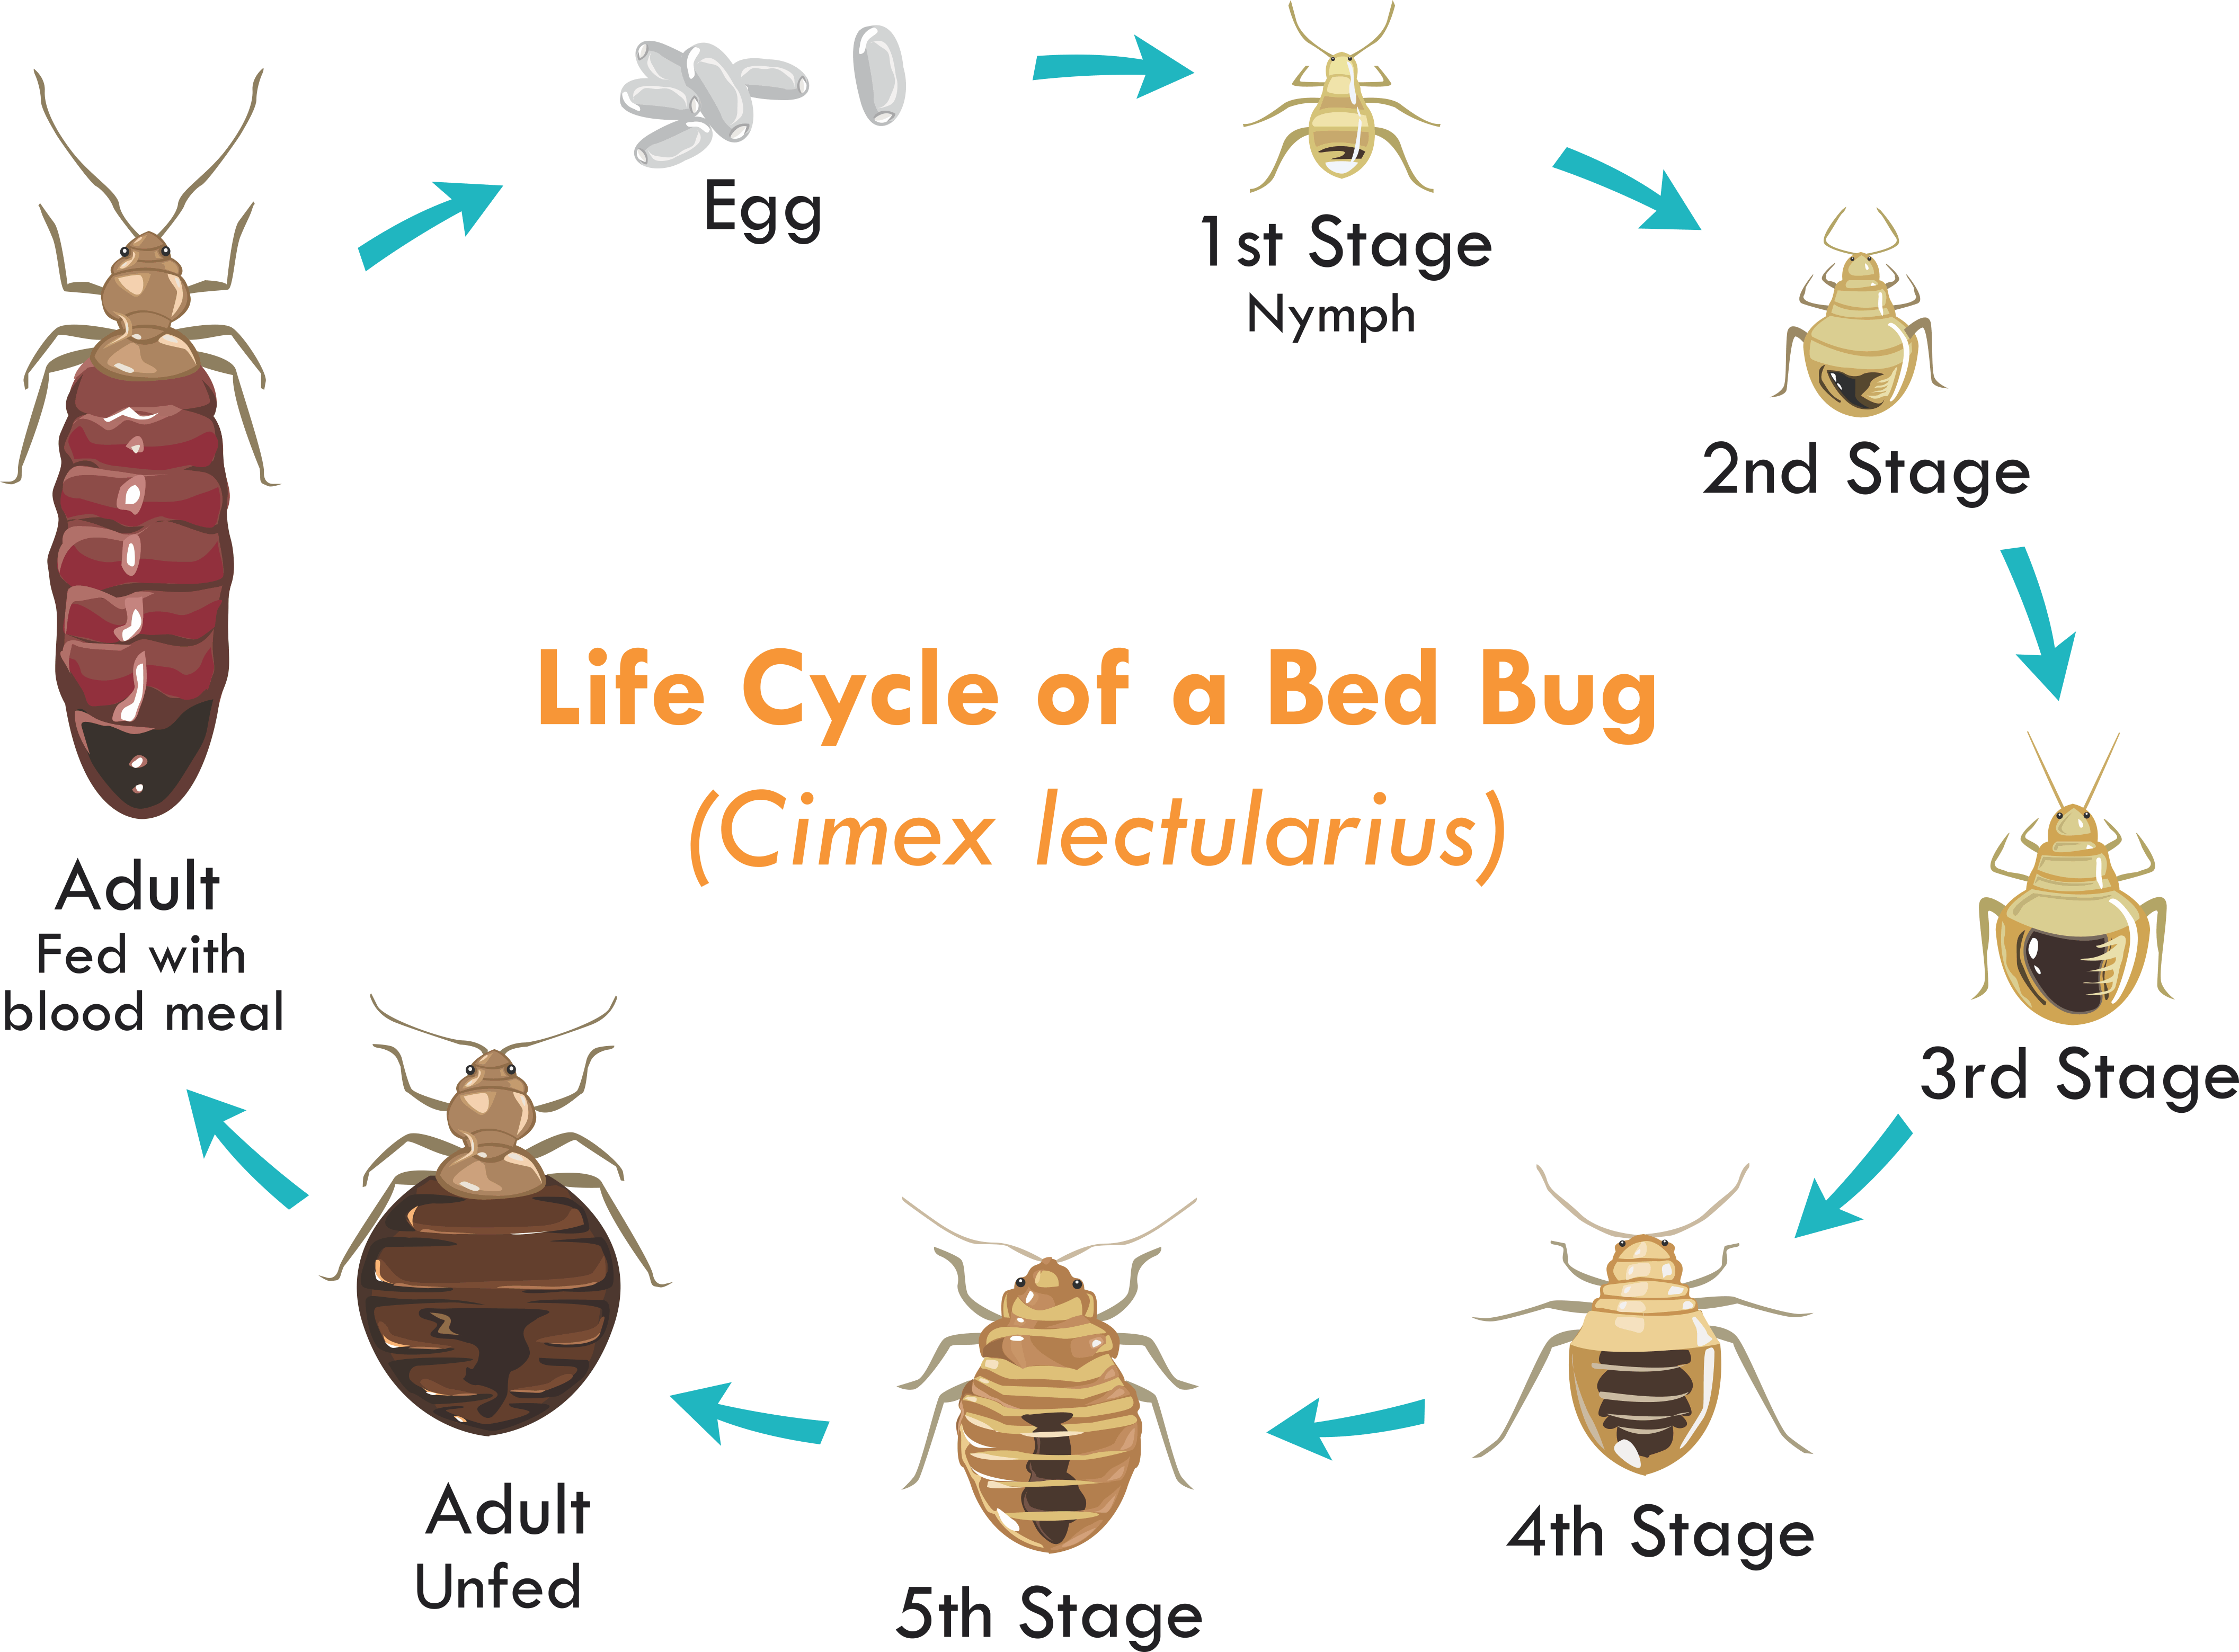 Heat vs Chemical Treatment for Bed Bugs: 12,000+ Treatments Done!